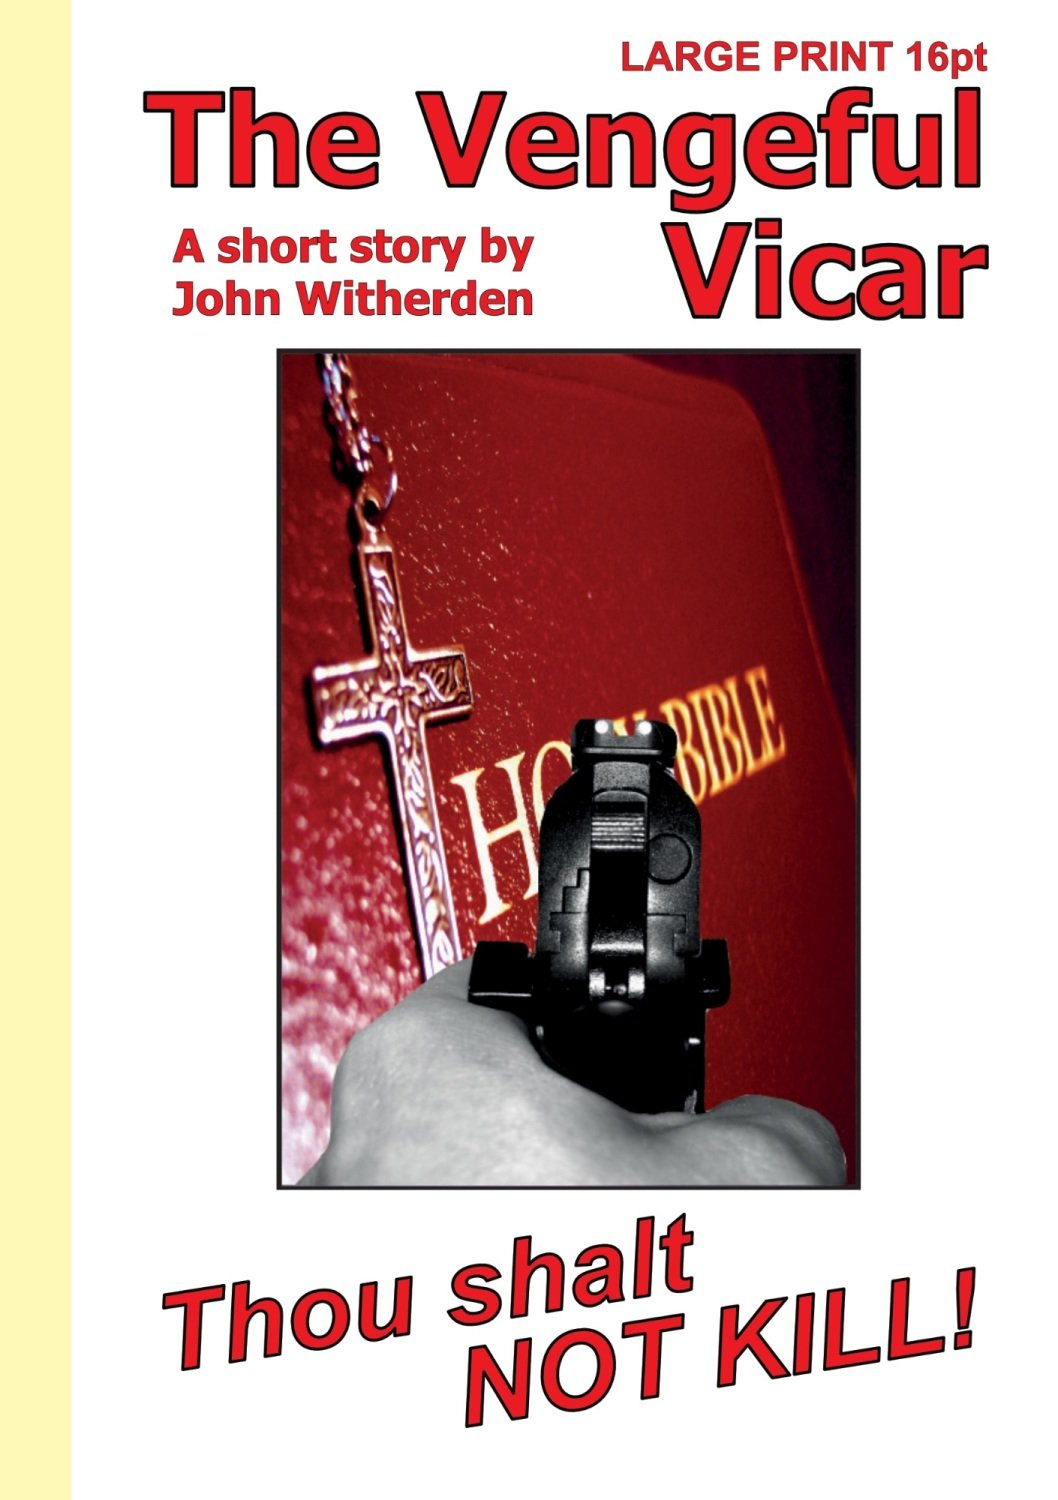 The Vengeful Vicar by John Witherden